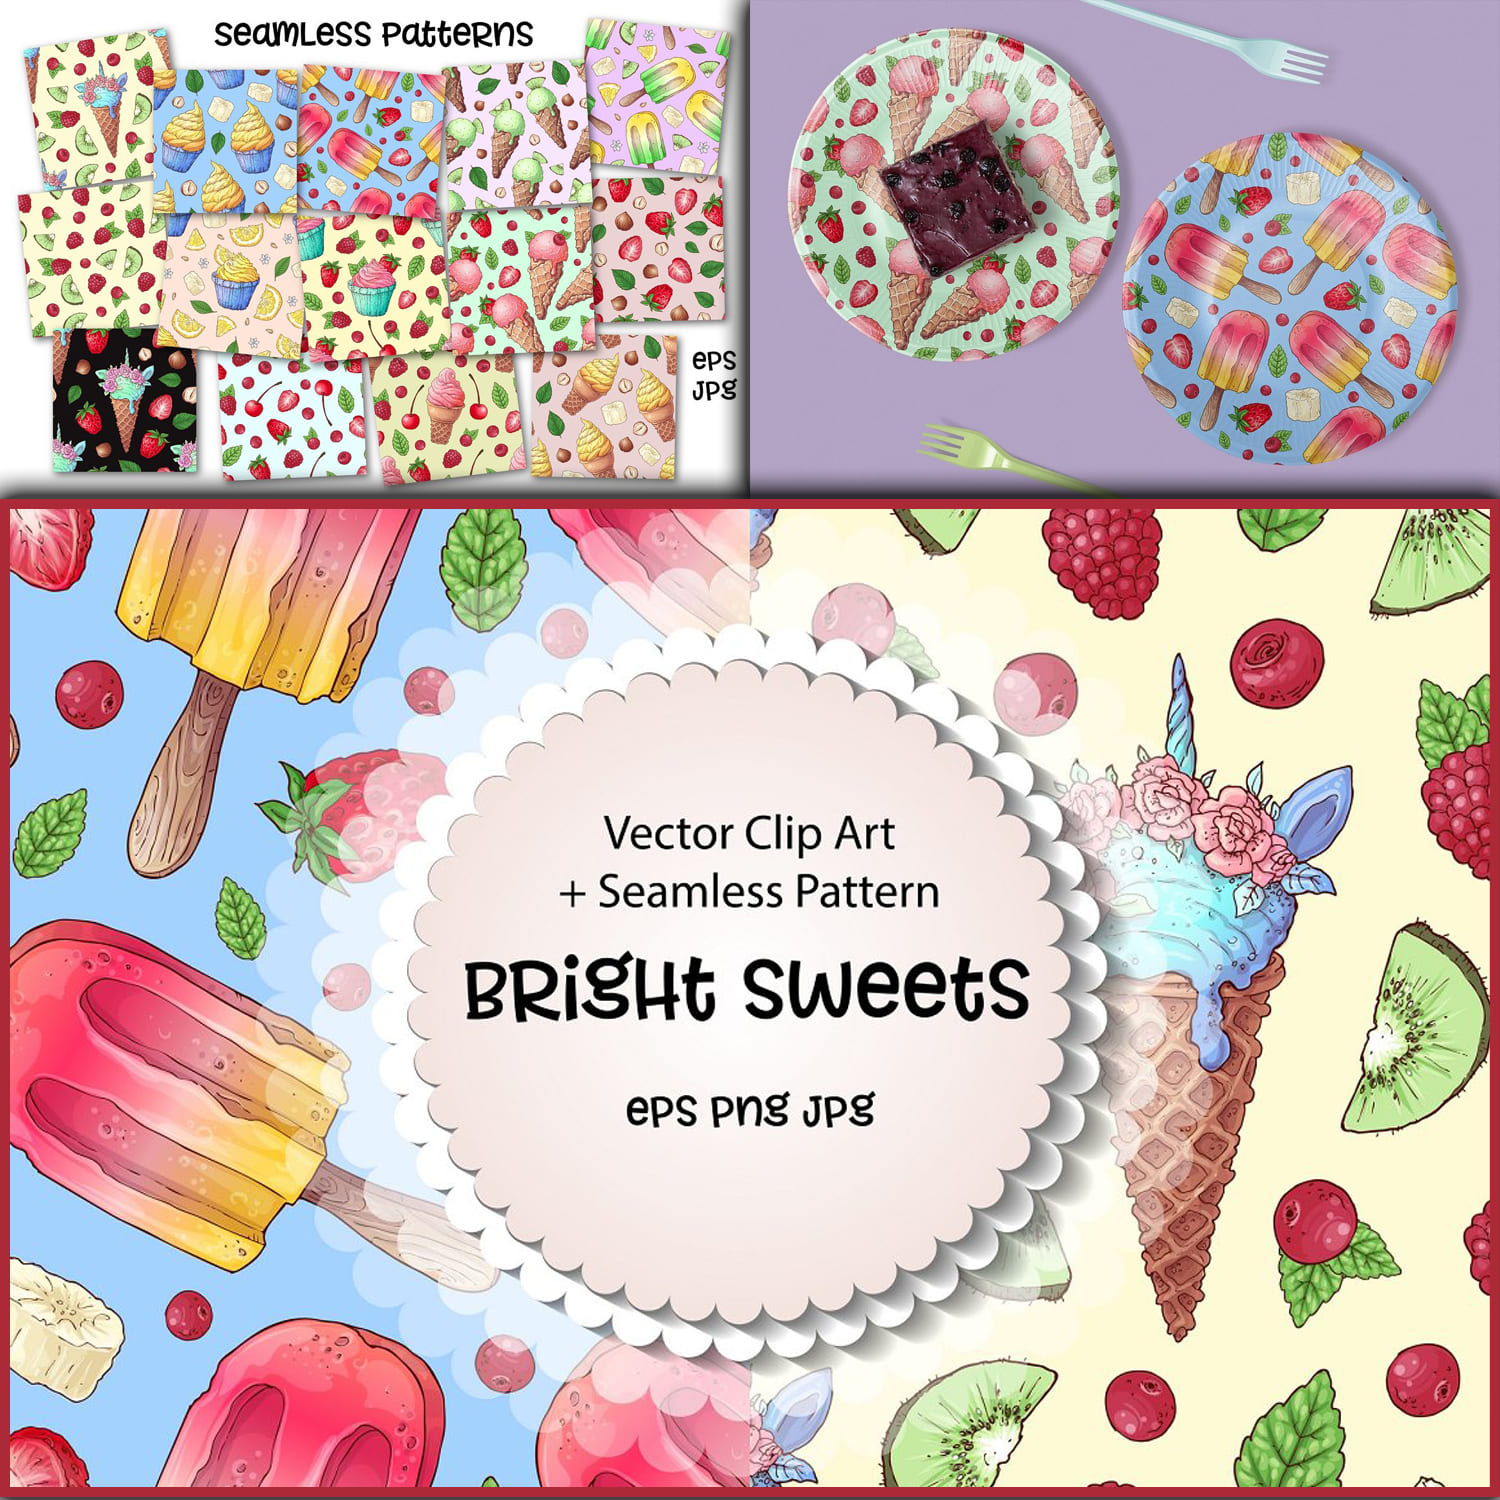 Bright sweets – vector clip art cover.